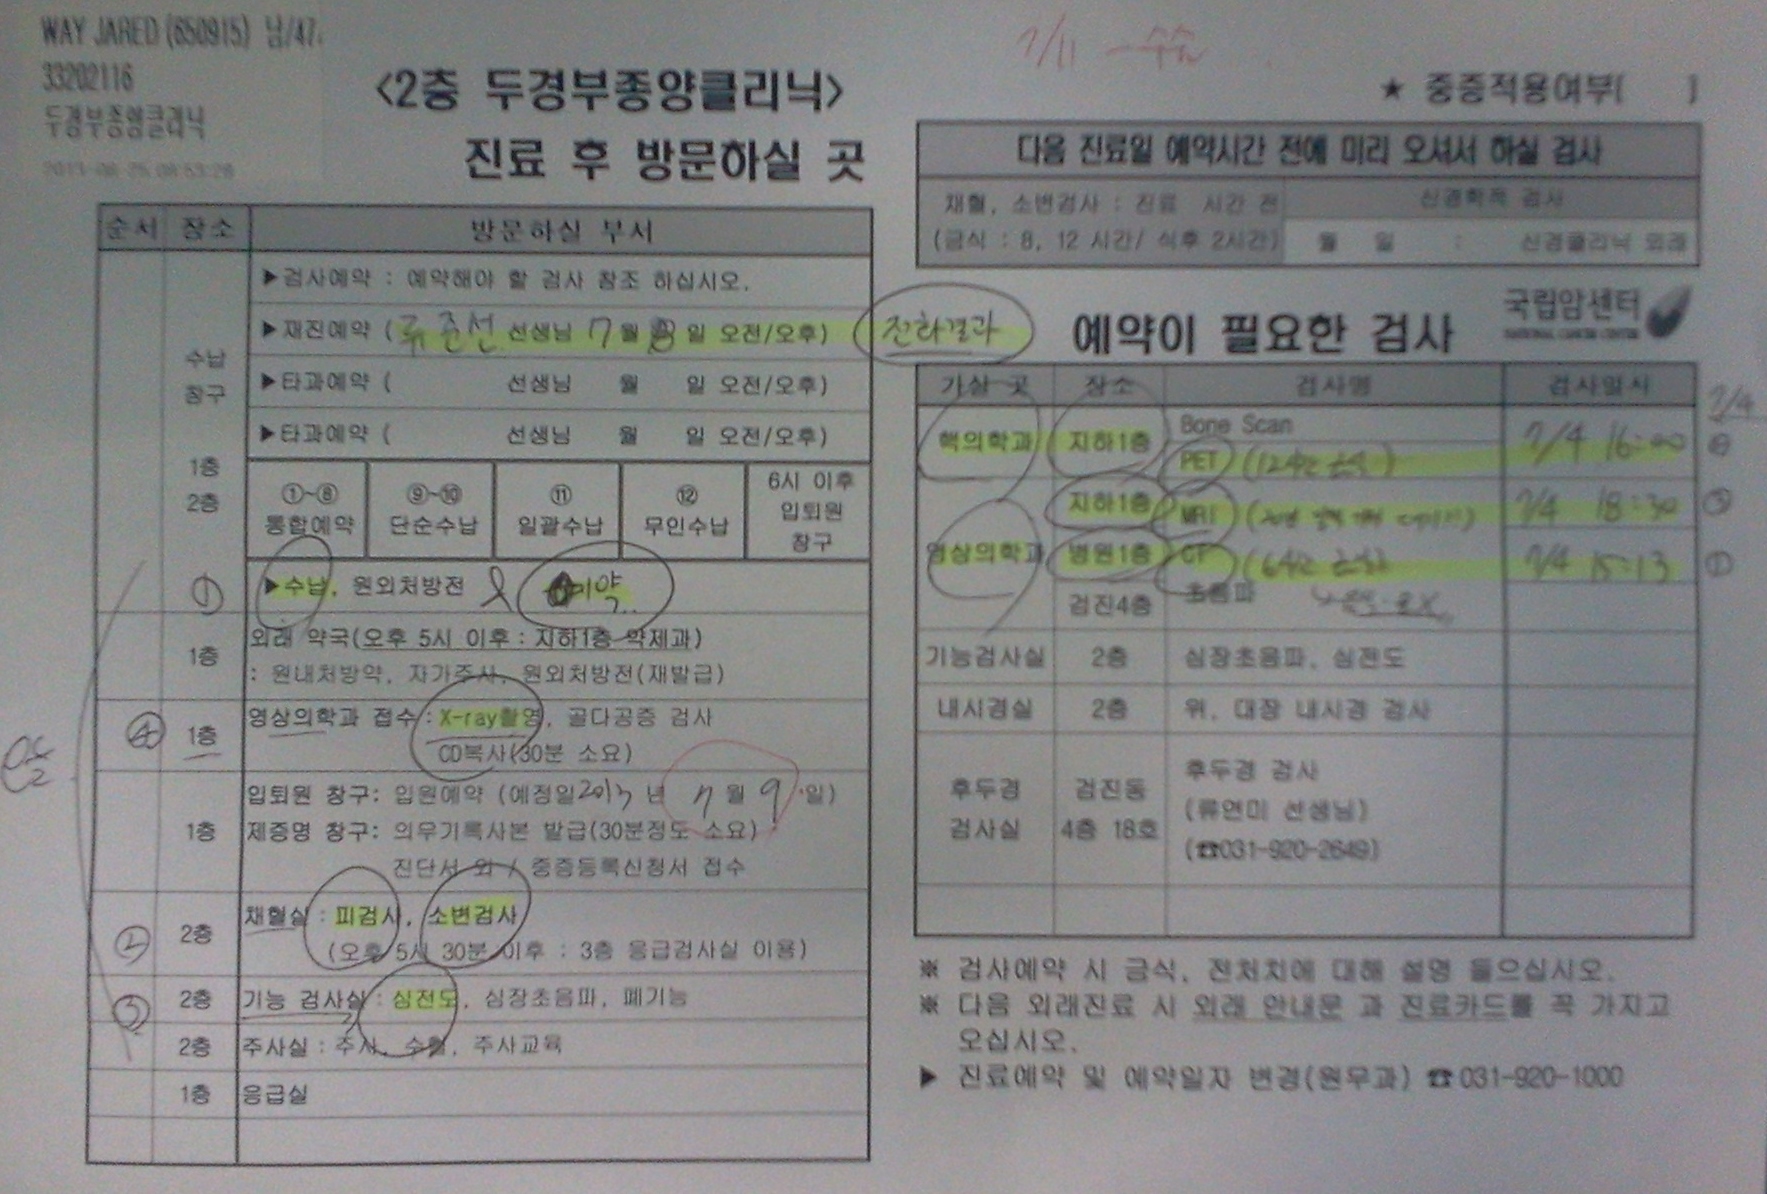 A photo of my diagnosis paper from the Korean hospital where I was being treated; it's all in Korean but it says I have cancer